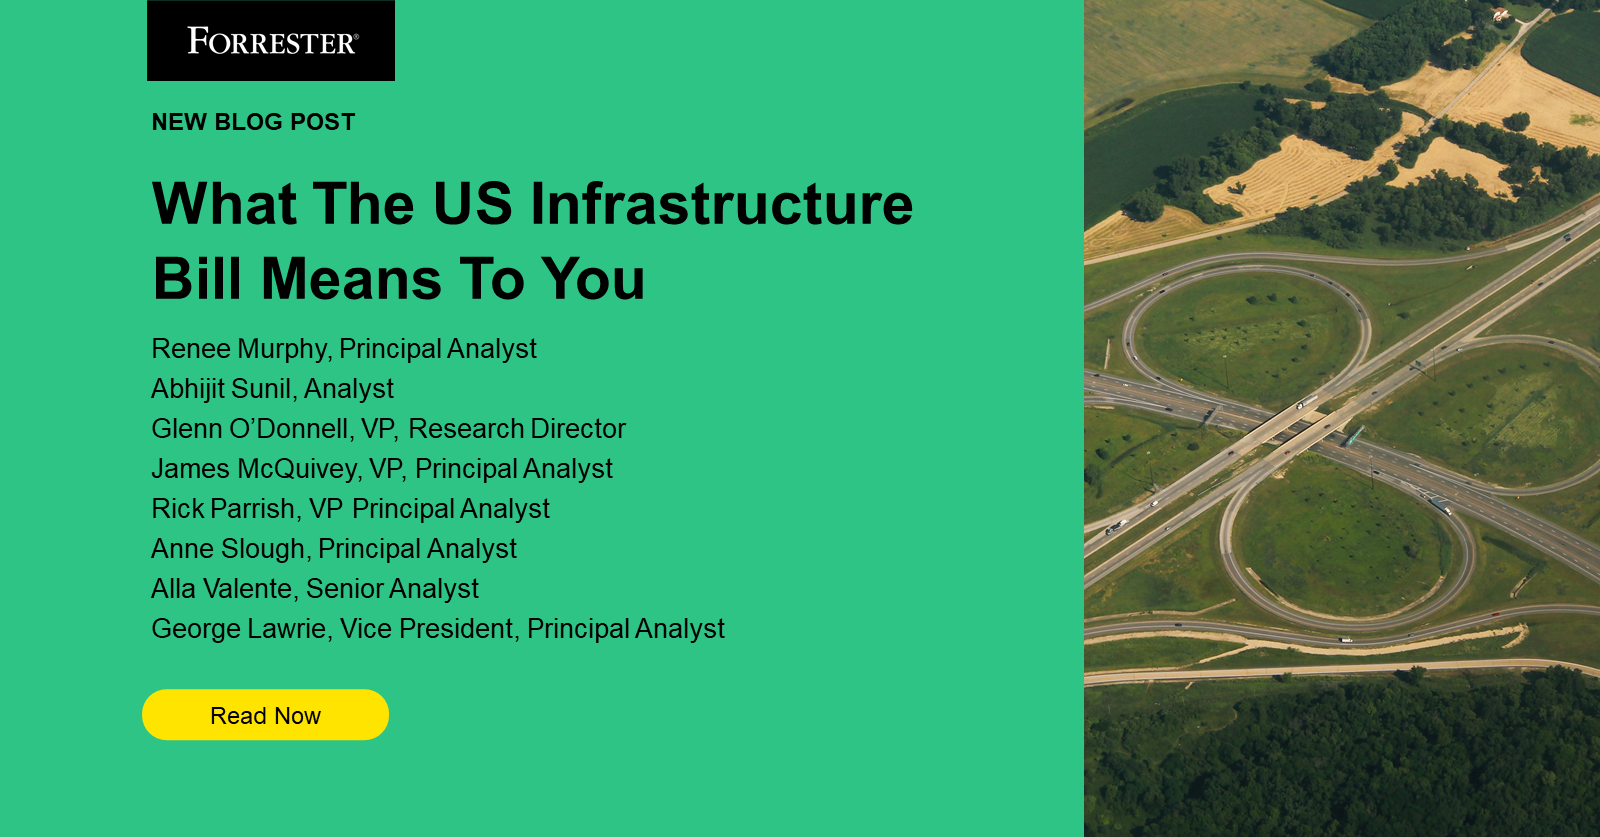 What The US Infrastructure Bill Means To You BPI The destination